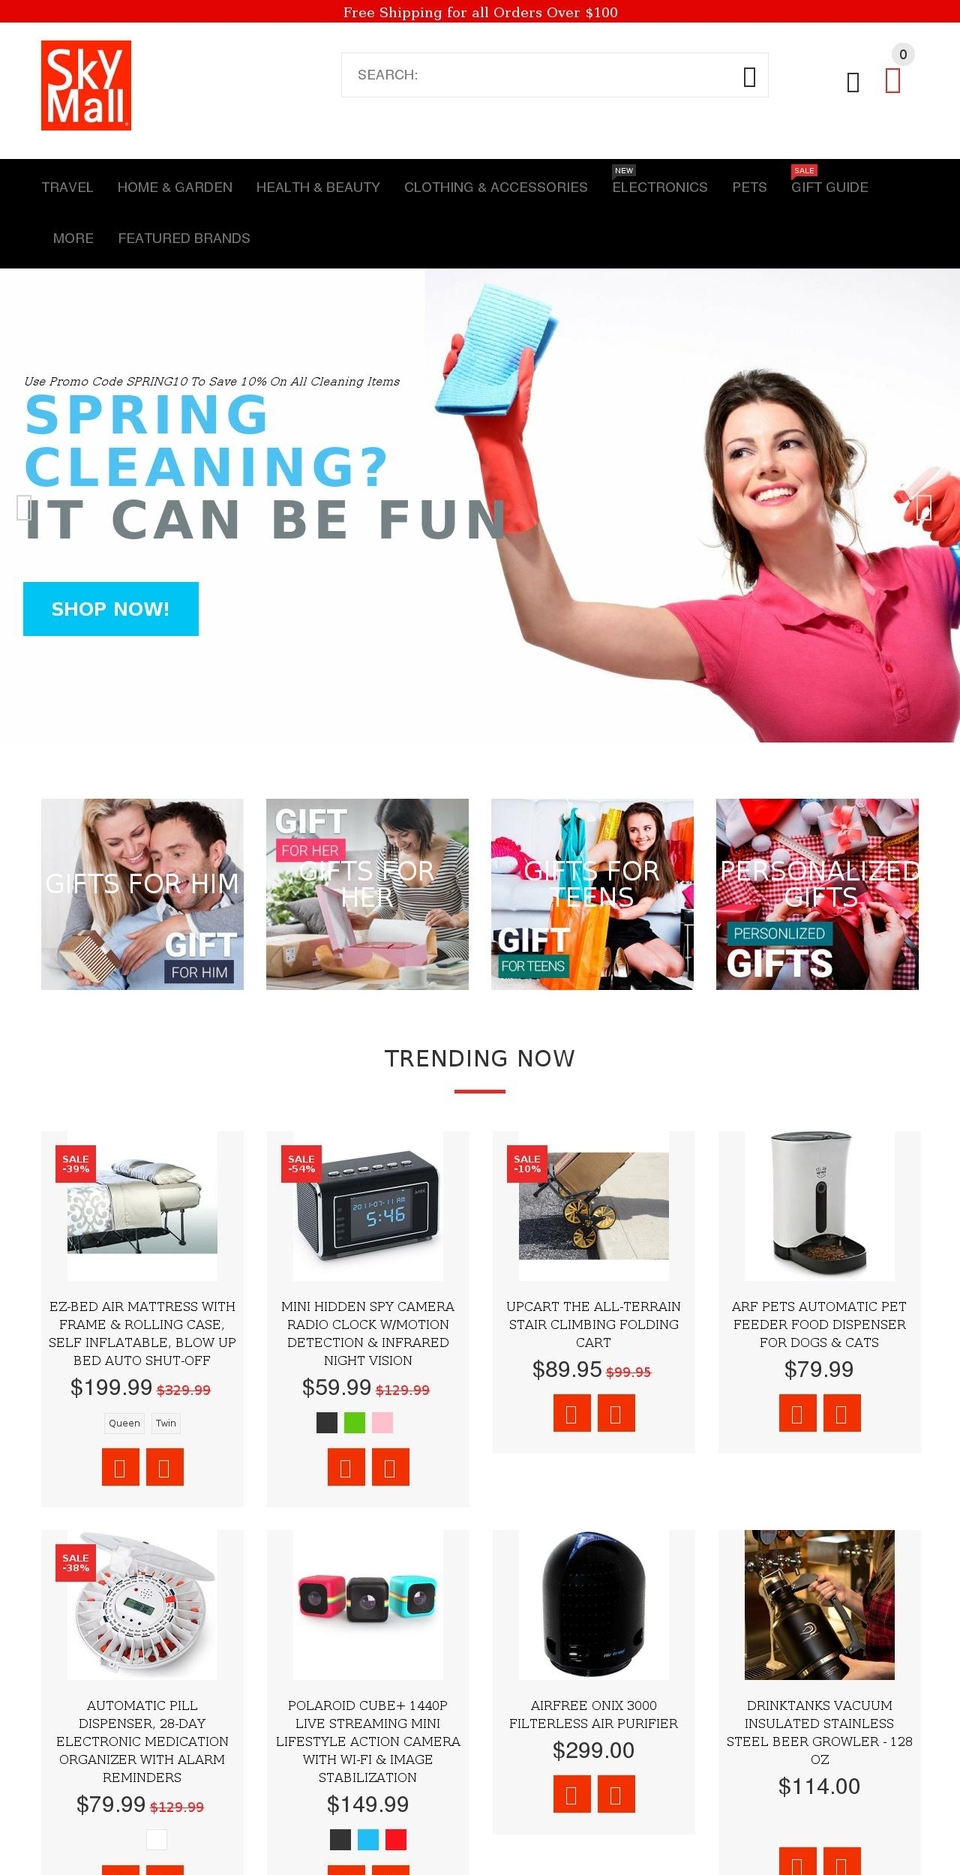 YourStore-V2-0-1A Shopify theme site example 3skymall.org